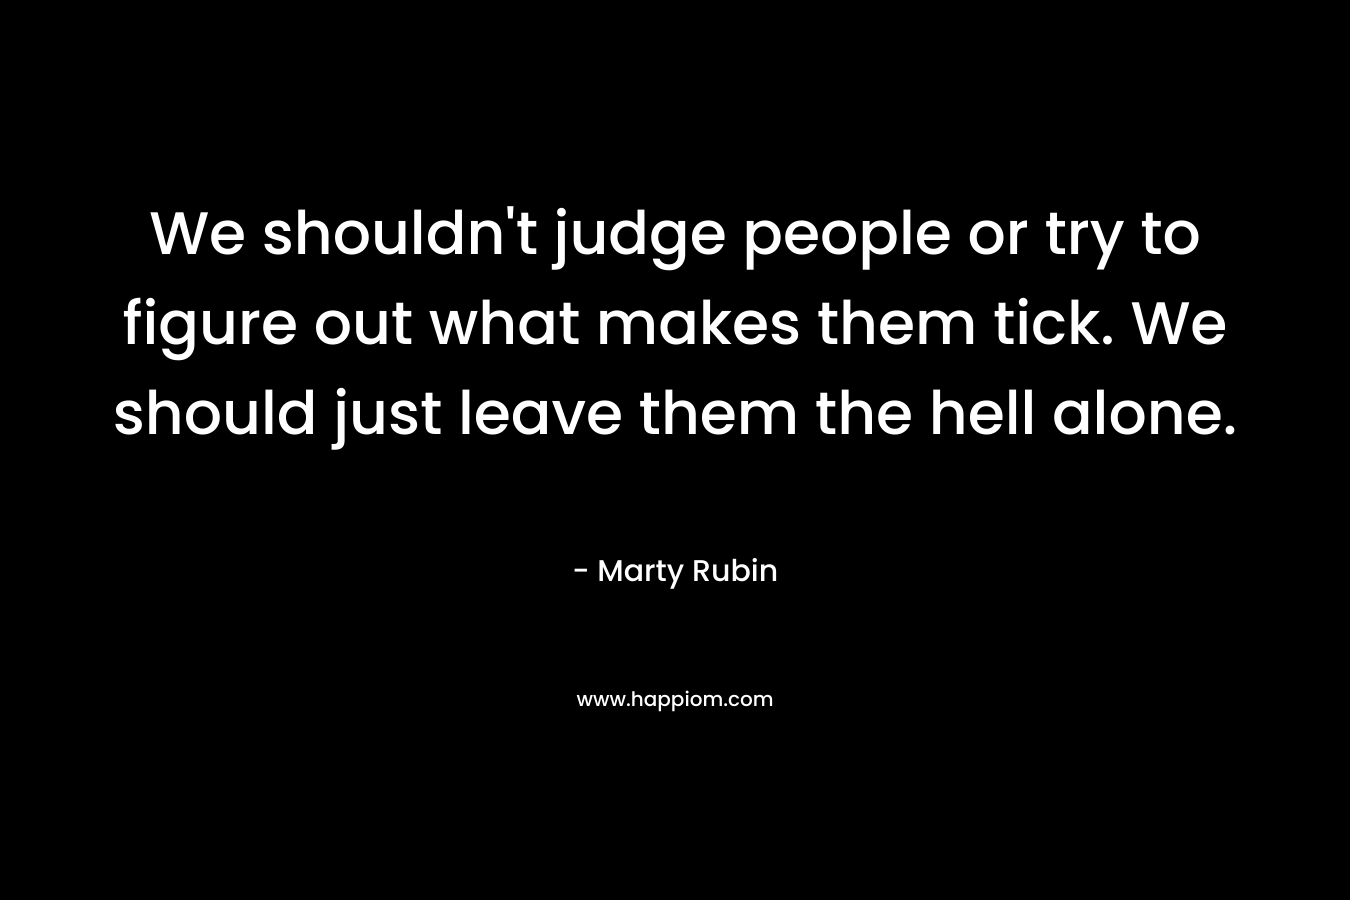 We shouldn't judge people or try to figure out what makes them tick. We should just leave them the hell alone.